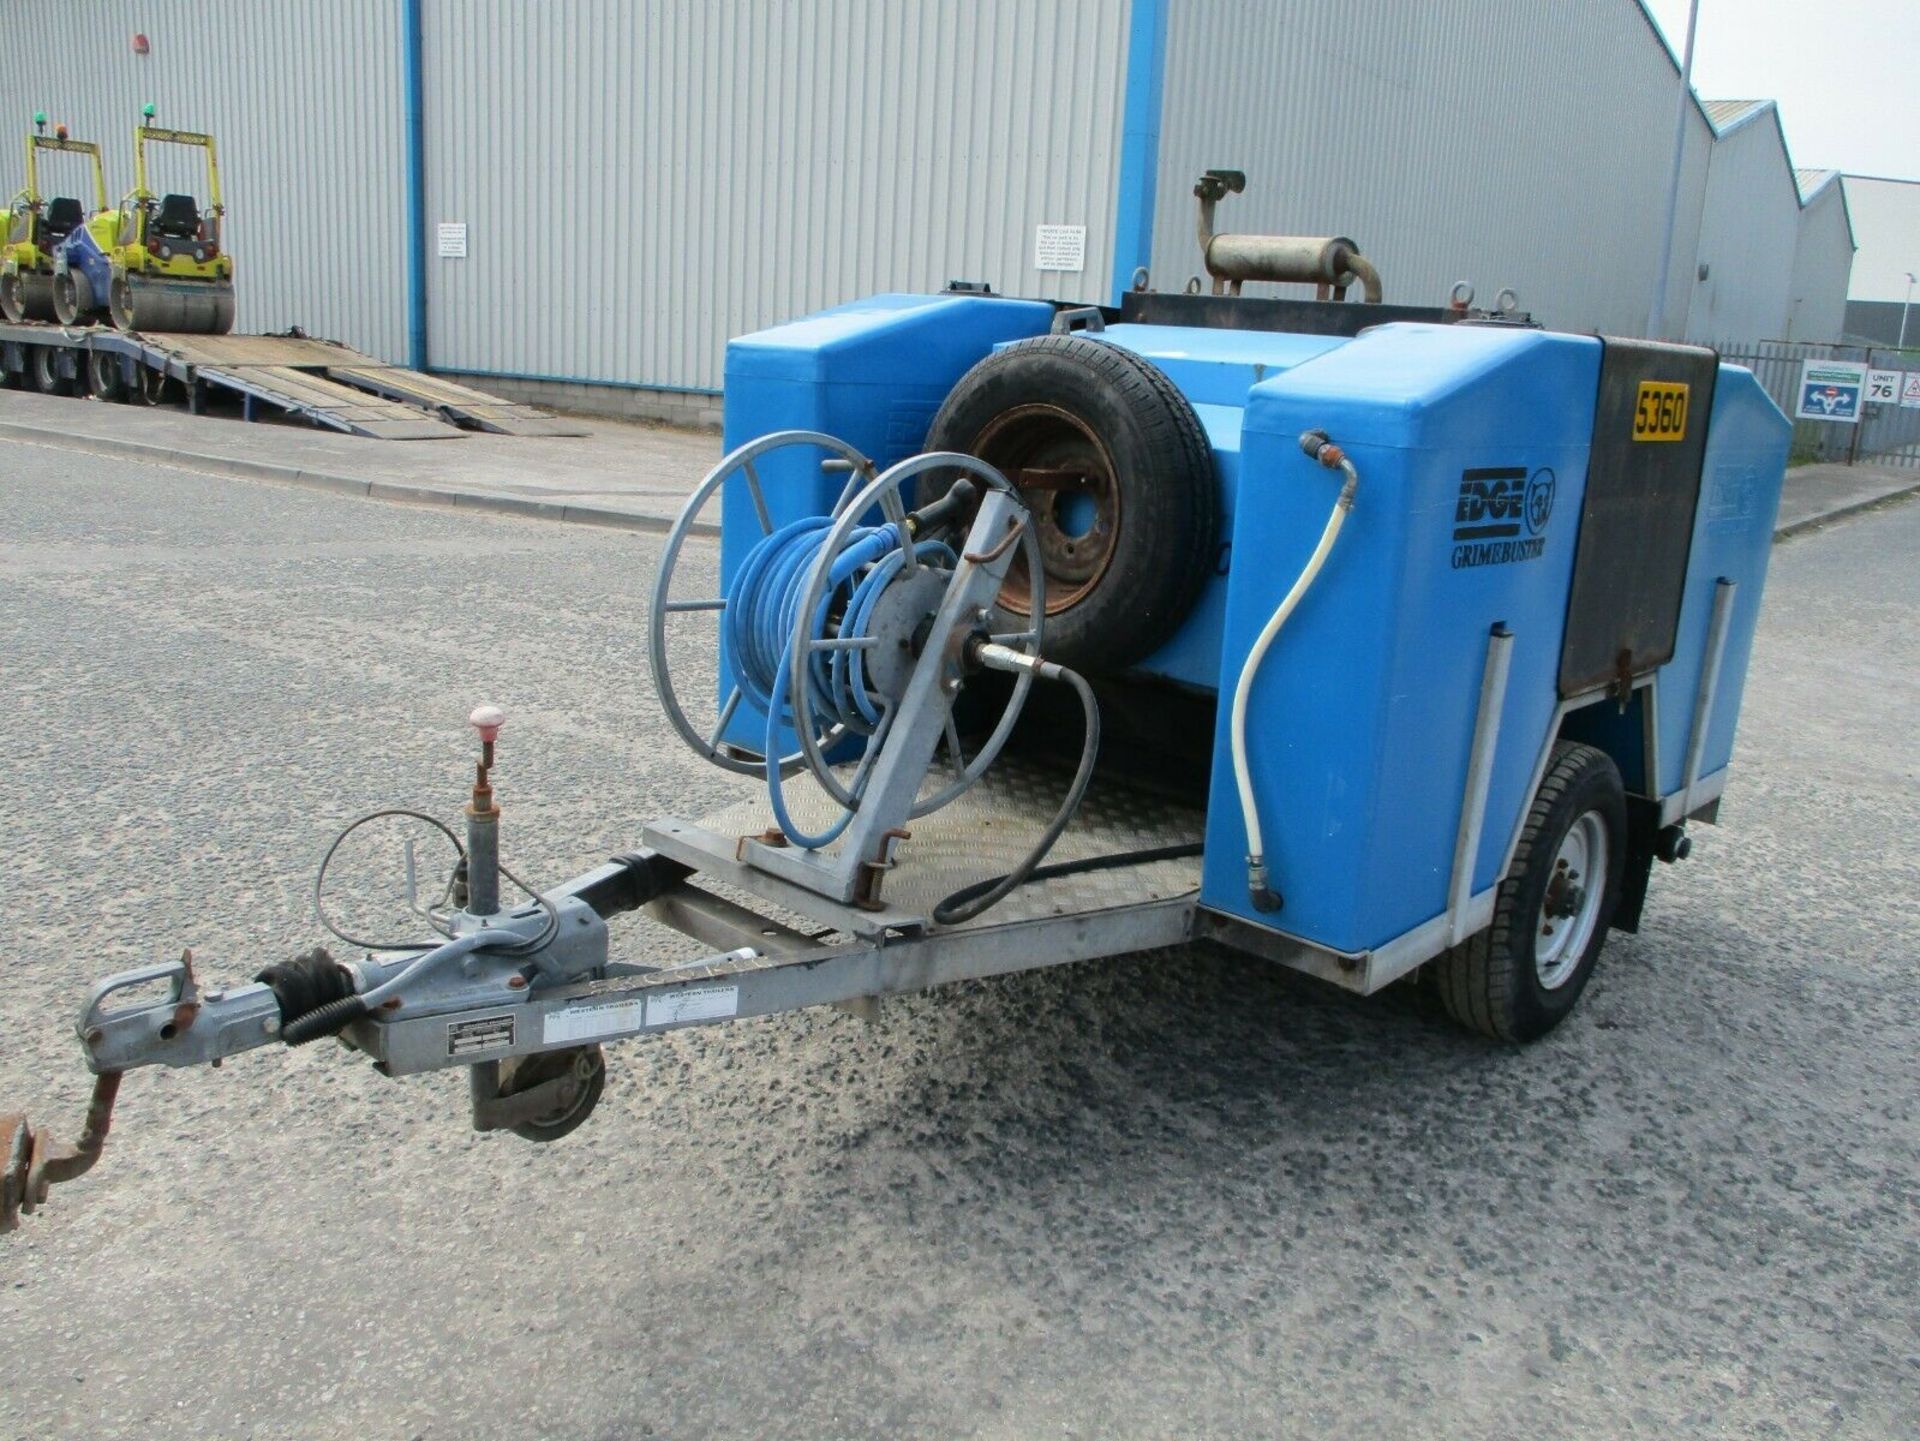 Edge Grime Buster Towable Hot and Cold Diesel Engined Pressure Washer - Image 4 of 4